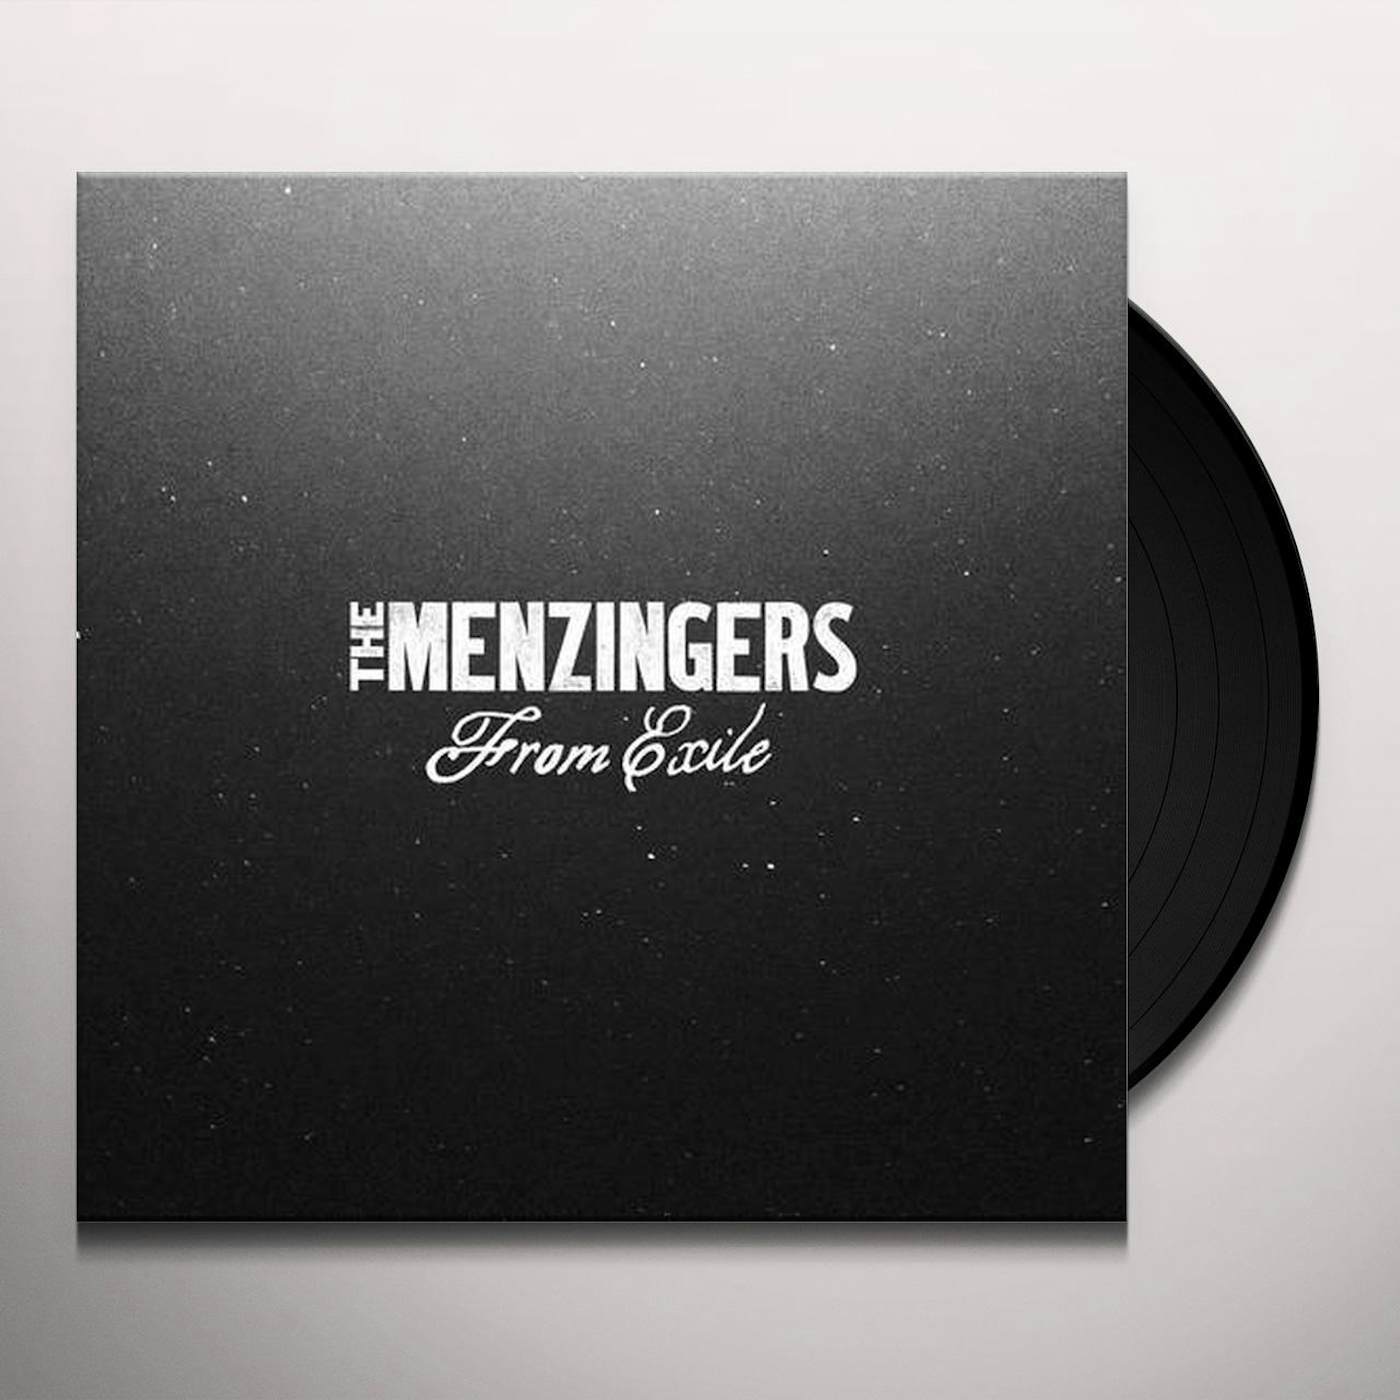 The Menzingers From Exile Vinyl Record